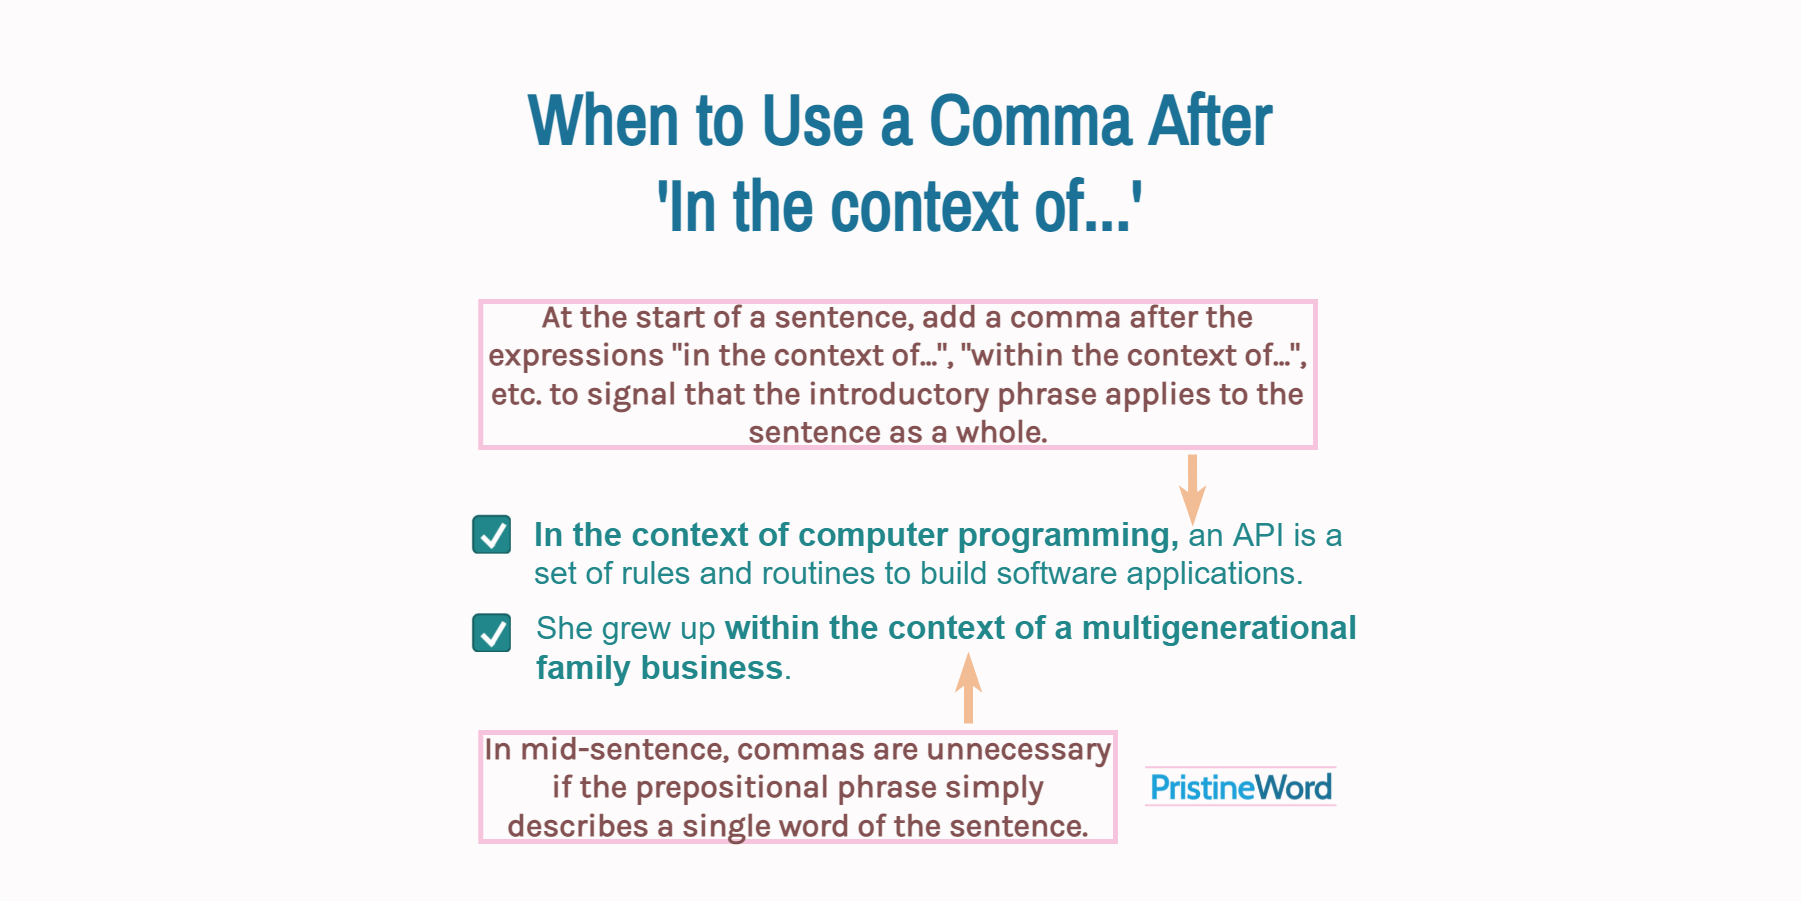 Commas With the Phrase 'In the context of'